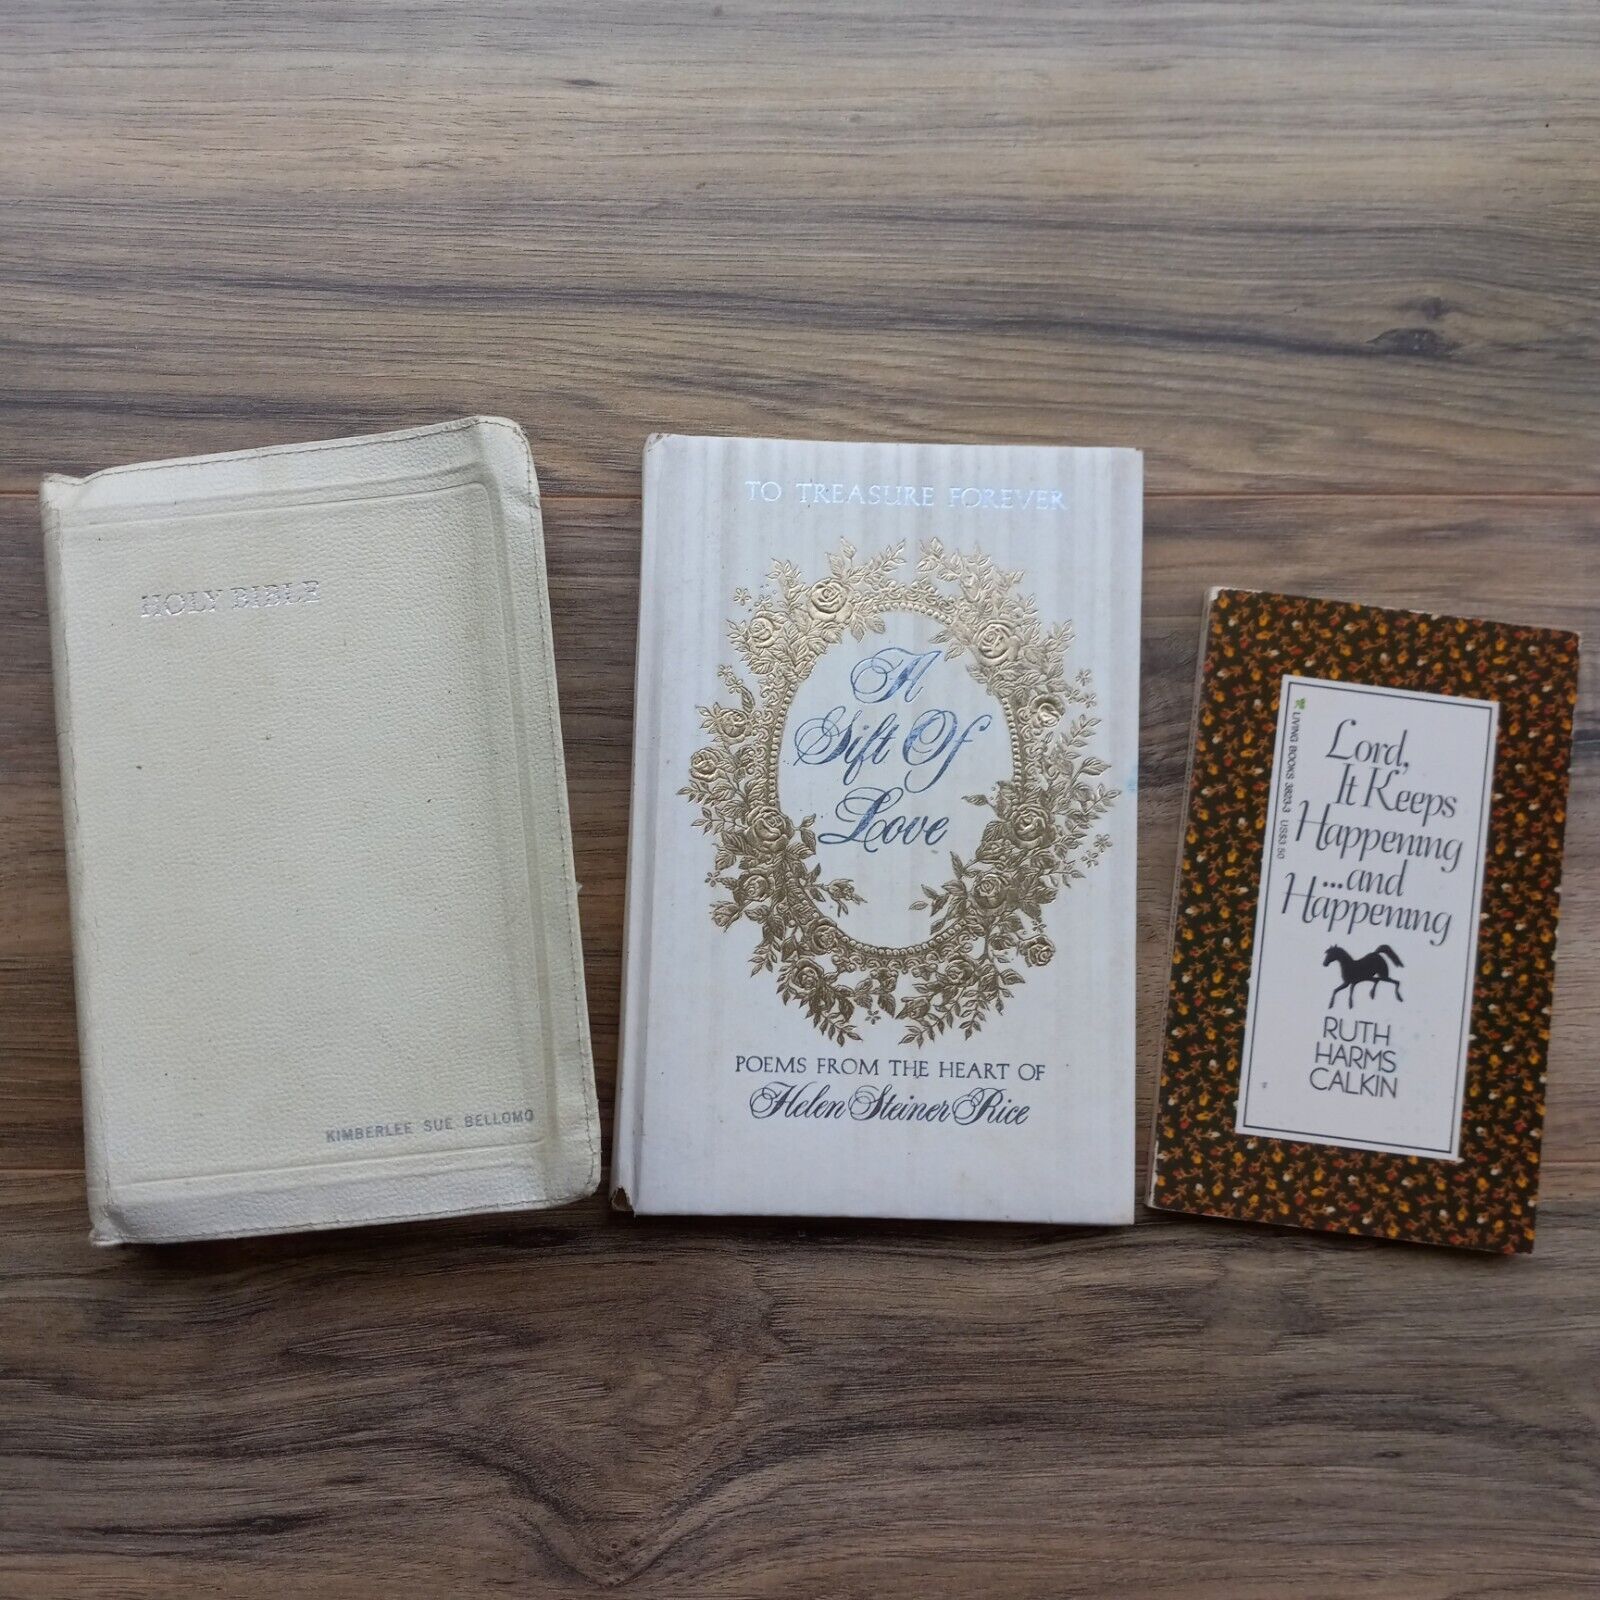 Holy Bible & Religious Love Poems Book Lot